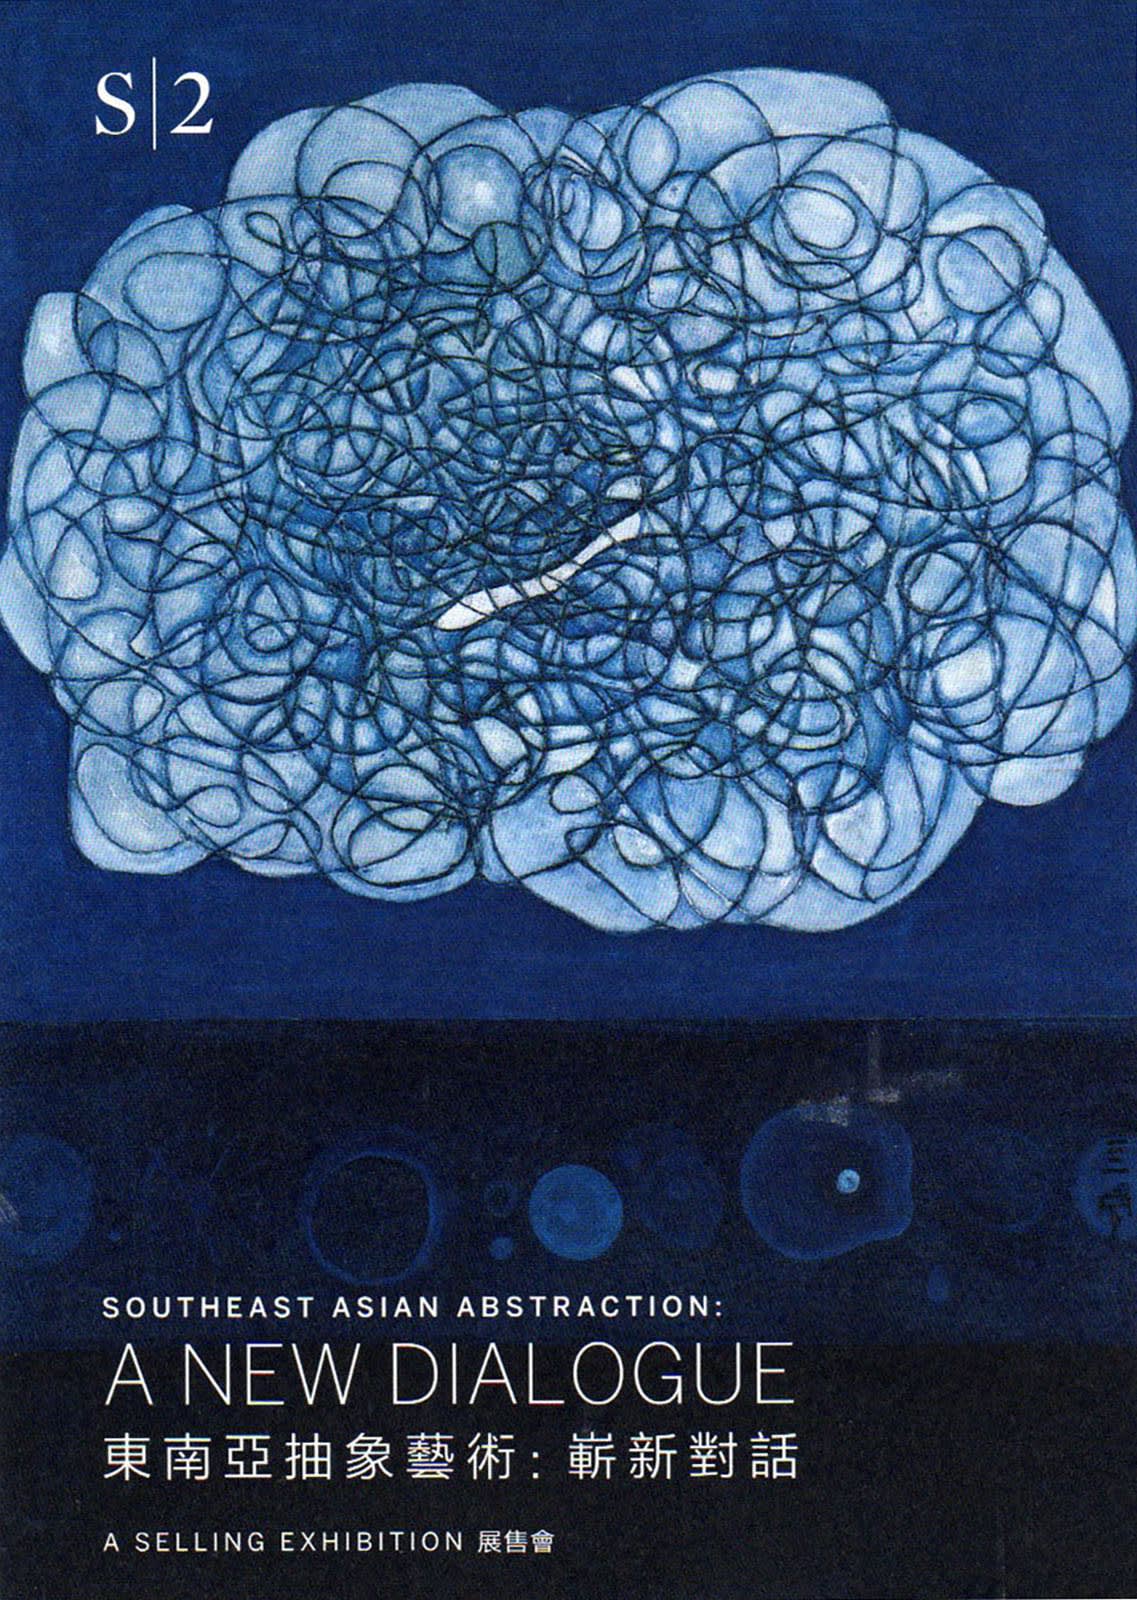 Southeast Asian Abstraction: A New Dialogue